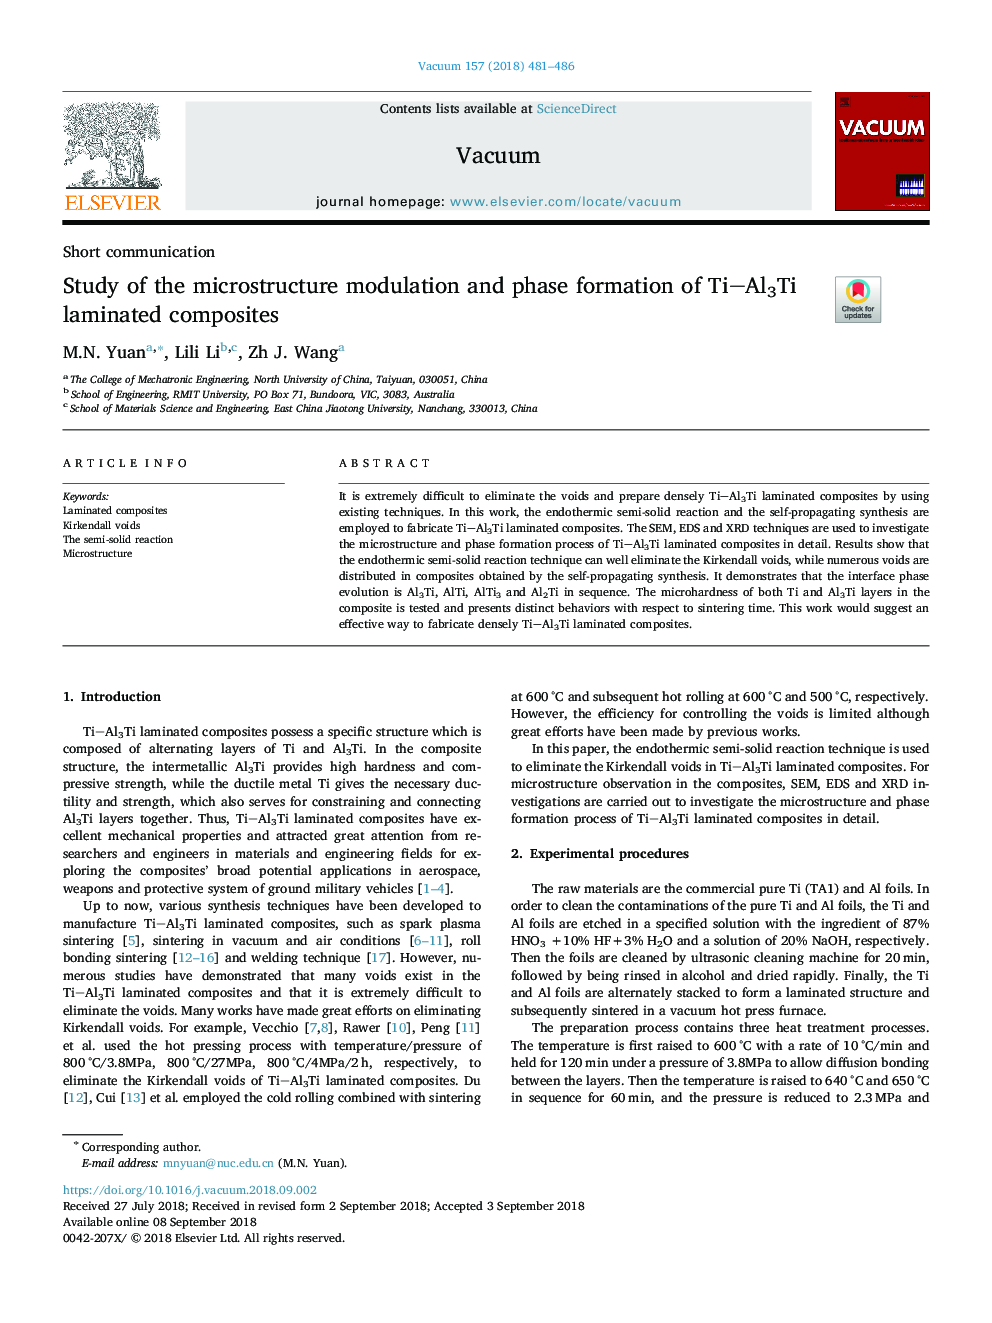 Study of the microstructure modulation and phase formation of TiAl3Ti laminated composites